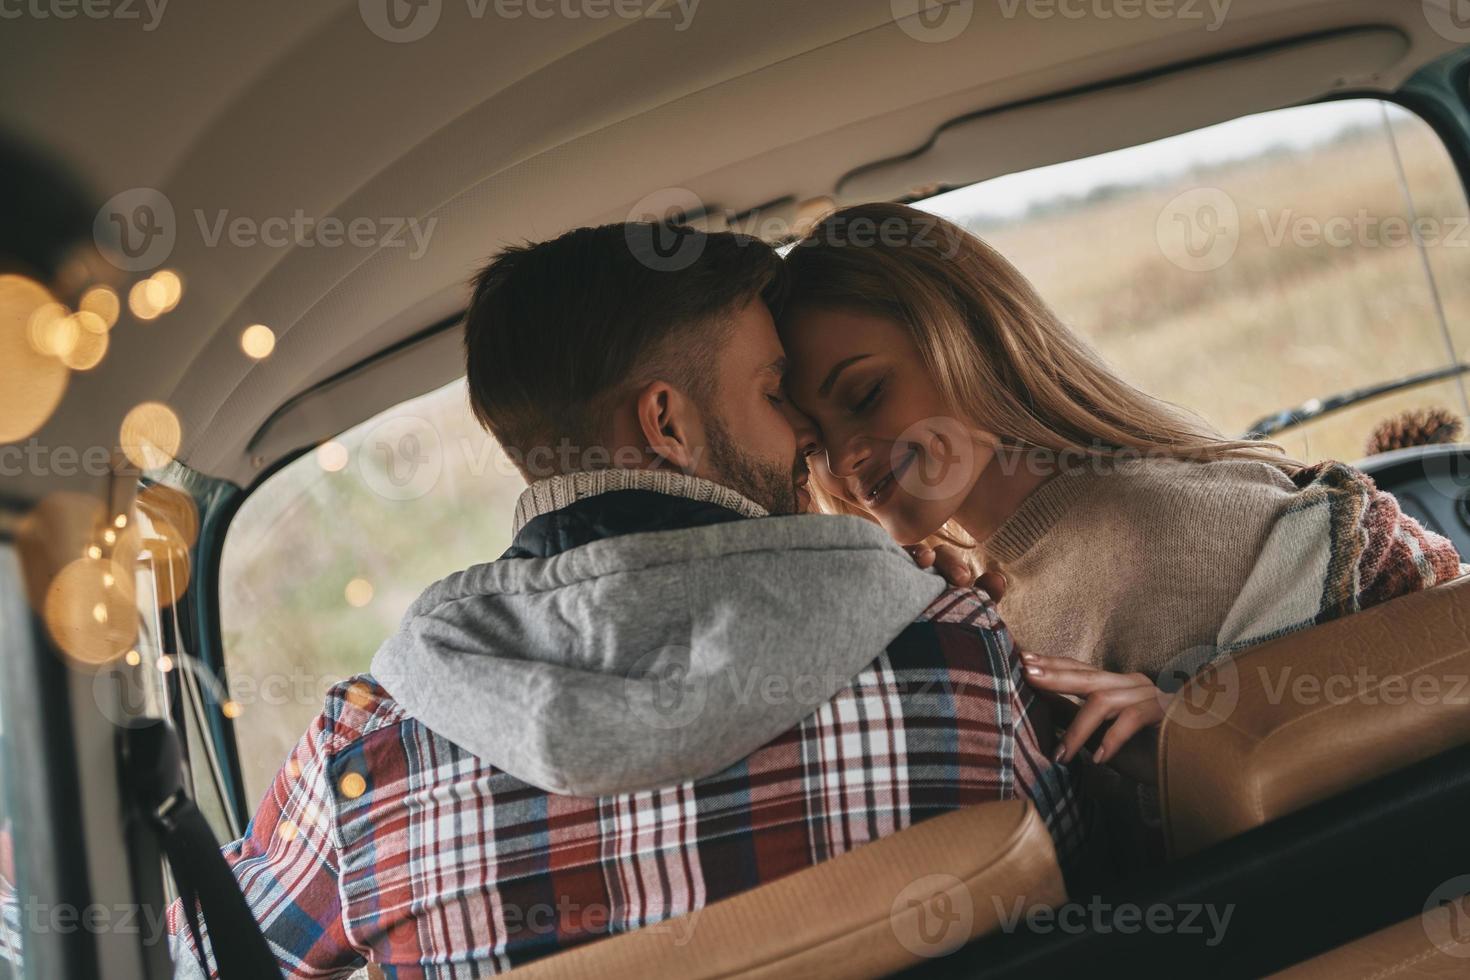 He will never let her go. Beautiful young couple smiling while sitting face to face on the front passenger seats in retro style mini van photo